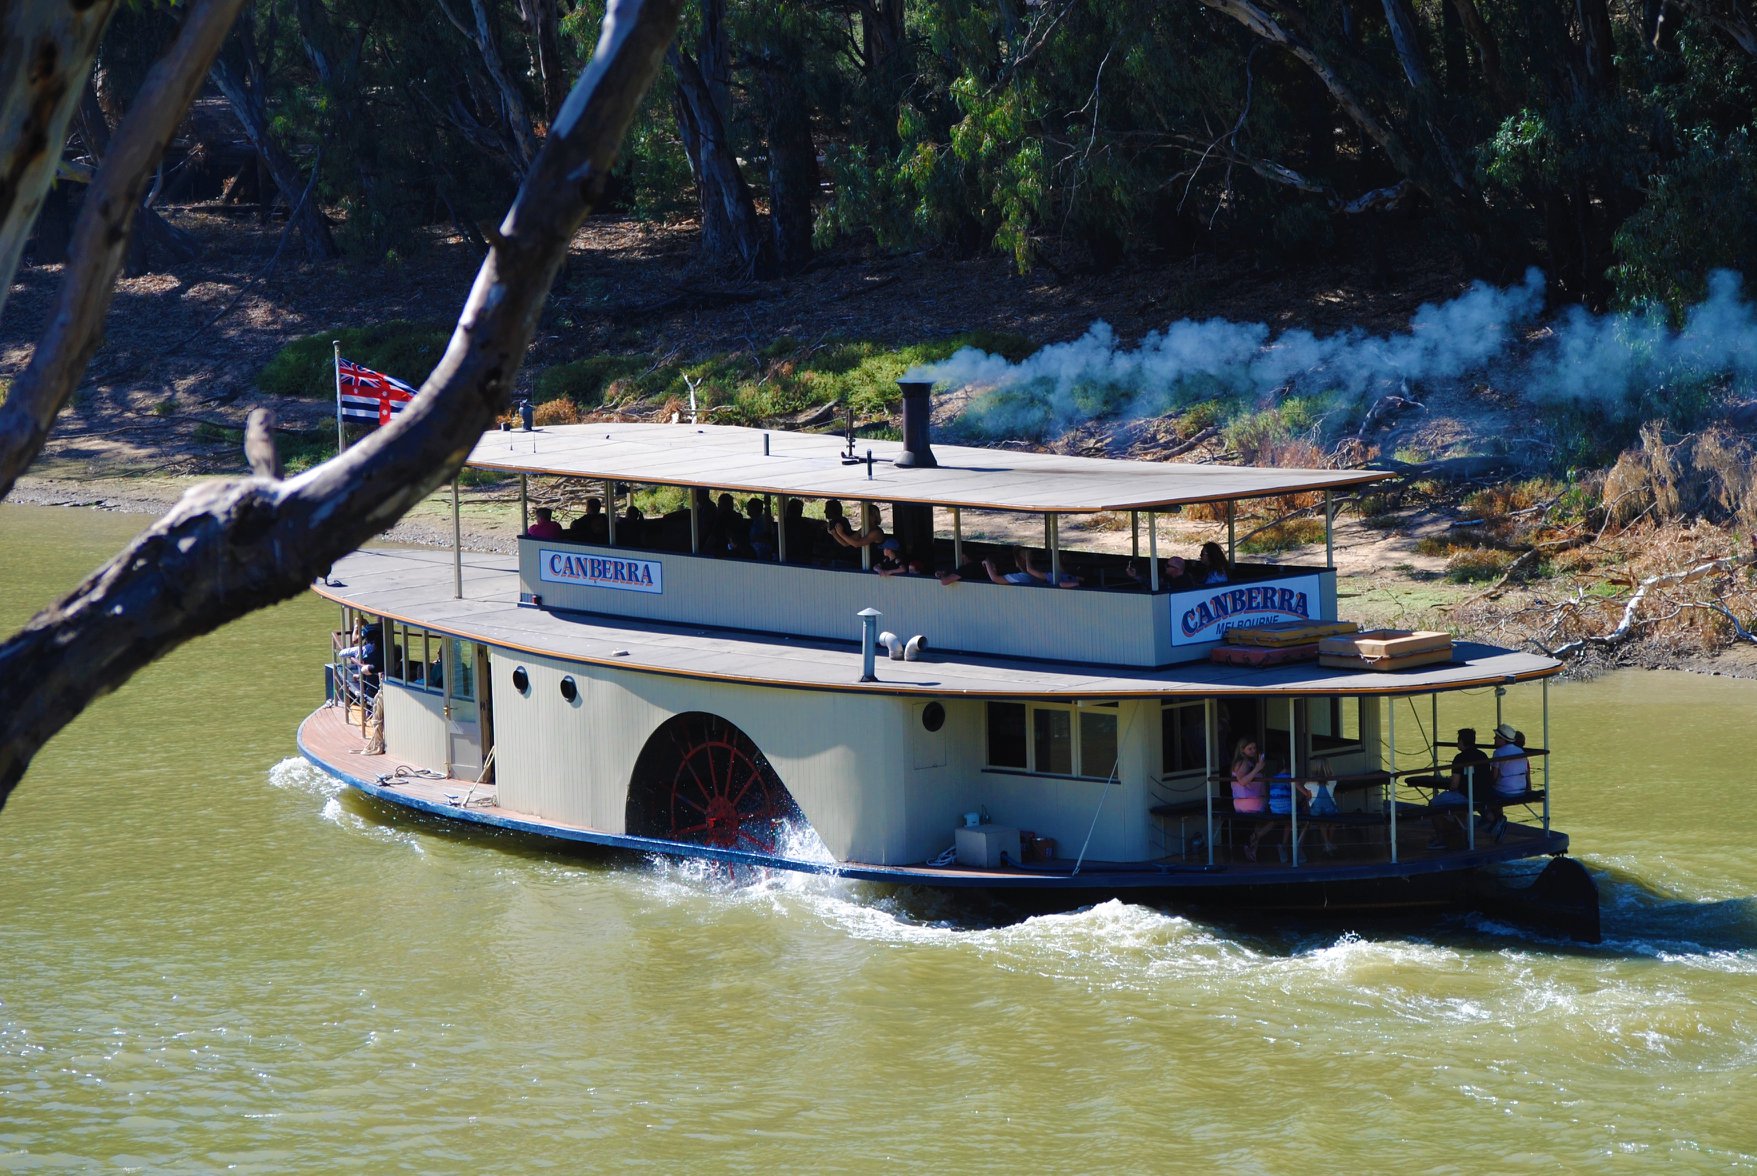 cruise the murray river